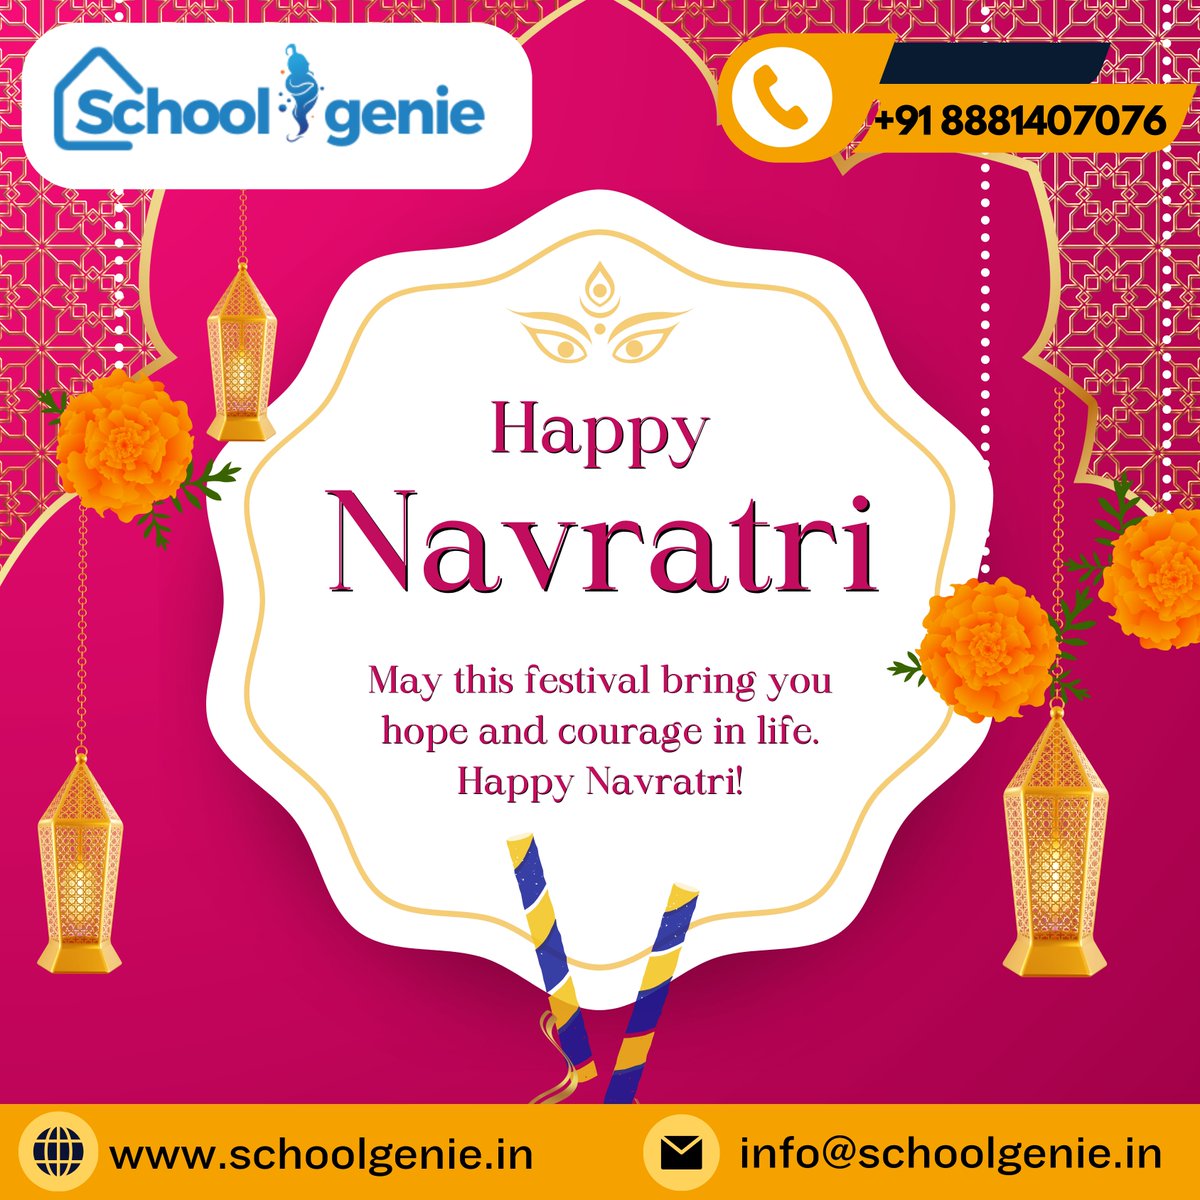 Celebrate Navratri from School genei with Vibrant Garba Raas and Stunning Decorations! School Genie ✨
#happynavratri #navratri #navratrigarba #festival #india #dancer #cultural #gujarat #devotional #religion #indiafestival #bhartiyeproducts #homedecor #diwalivibes #india